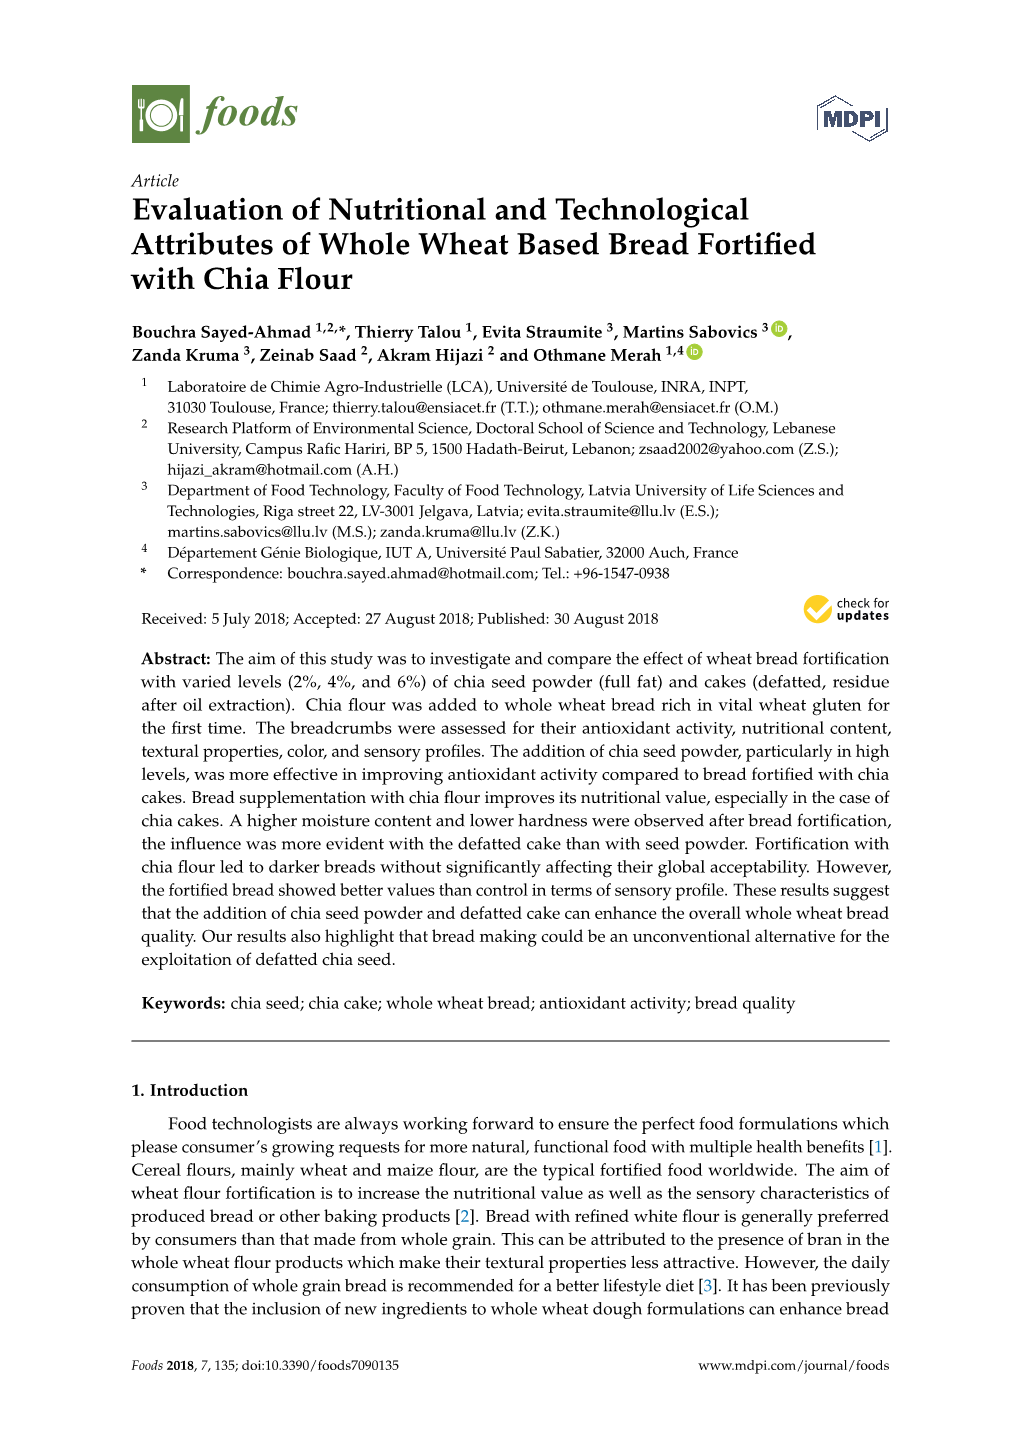 Evaluation of Nutritional and Technological Attributes of Whole Wheat Based Bread Fortiﬁed with Chia Flour